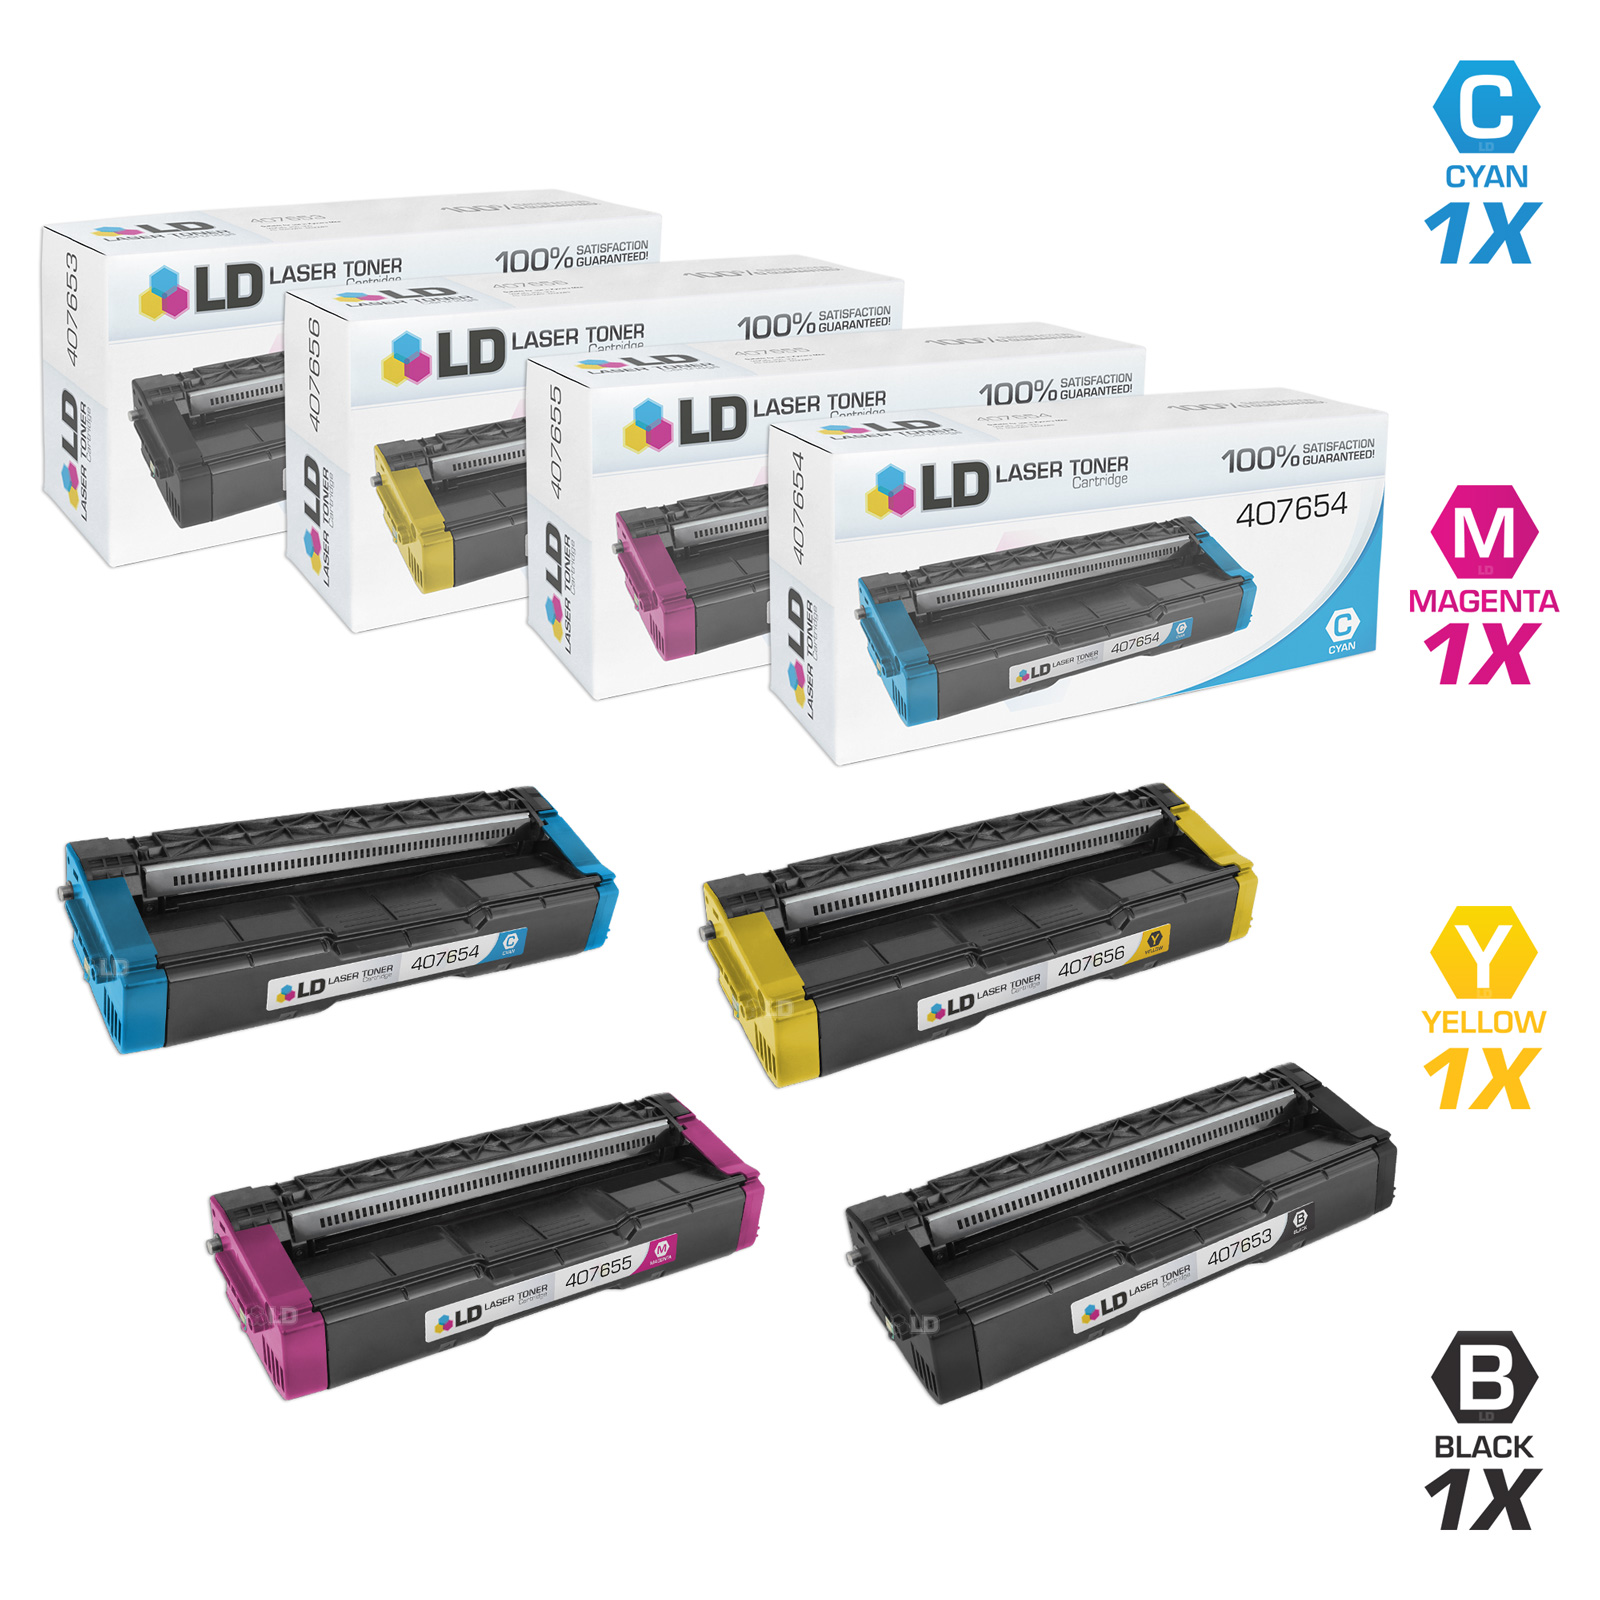 LD Compatible Replacement for Ricoh SP C252HA Toner Cartridge Set: 407653 Black, 407654 Cyan, 407655 Magenta, 407656 Yellow for SPC252DN, SPC252SF, C252DN, C252SF, C262DNw, C262SFNw - image 1 of 7